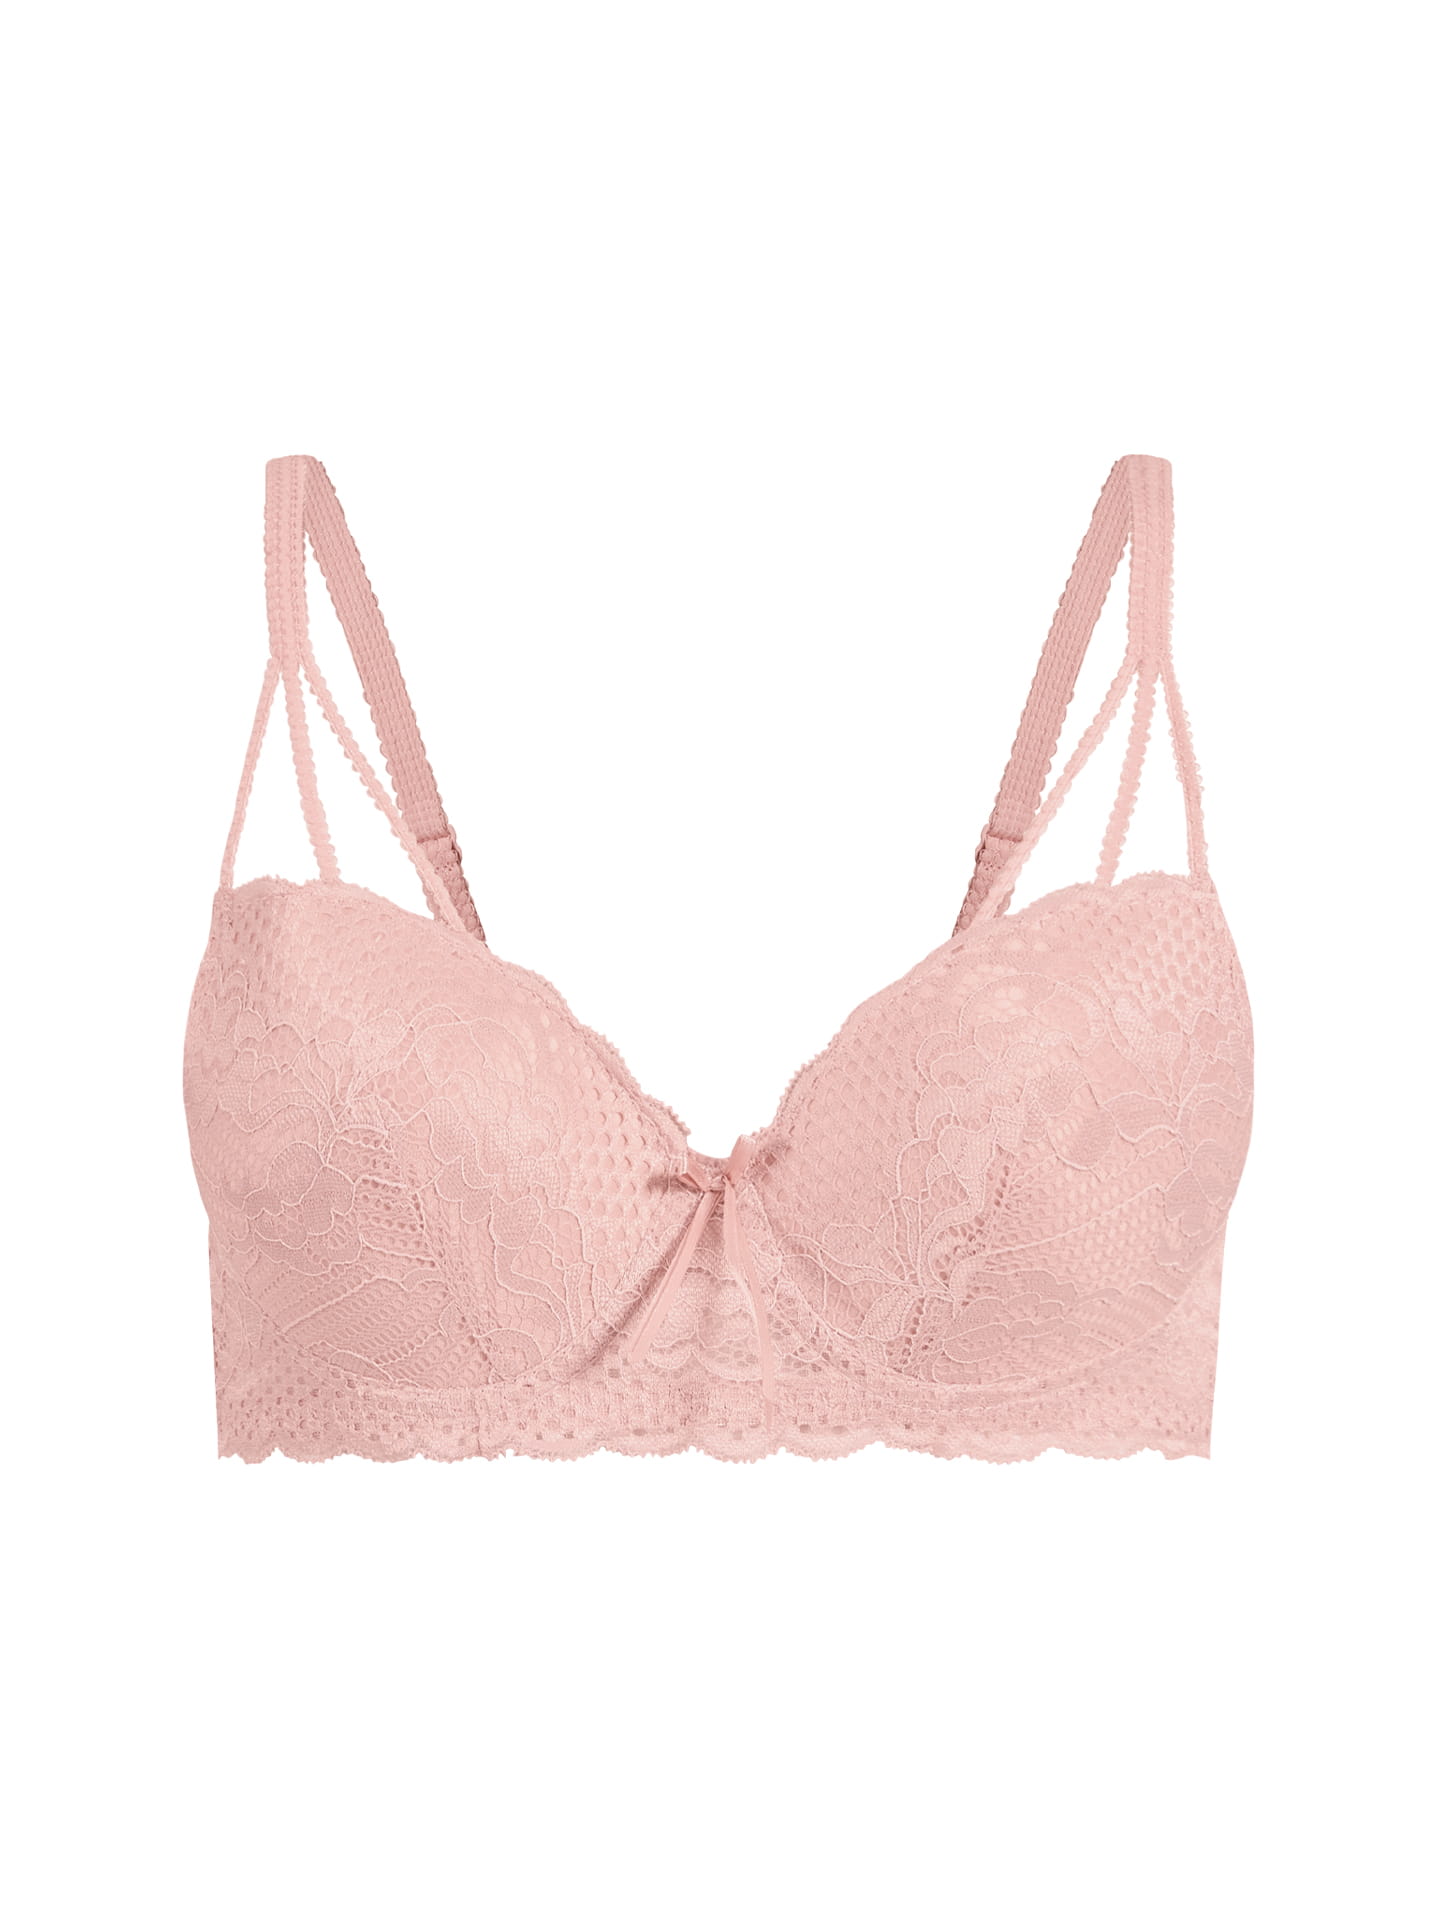 Bra with triple strap detail in pink, 4.99€